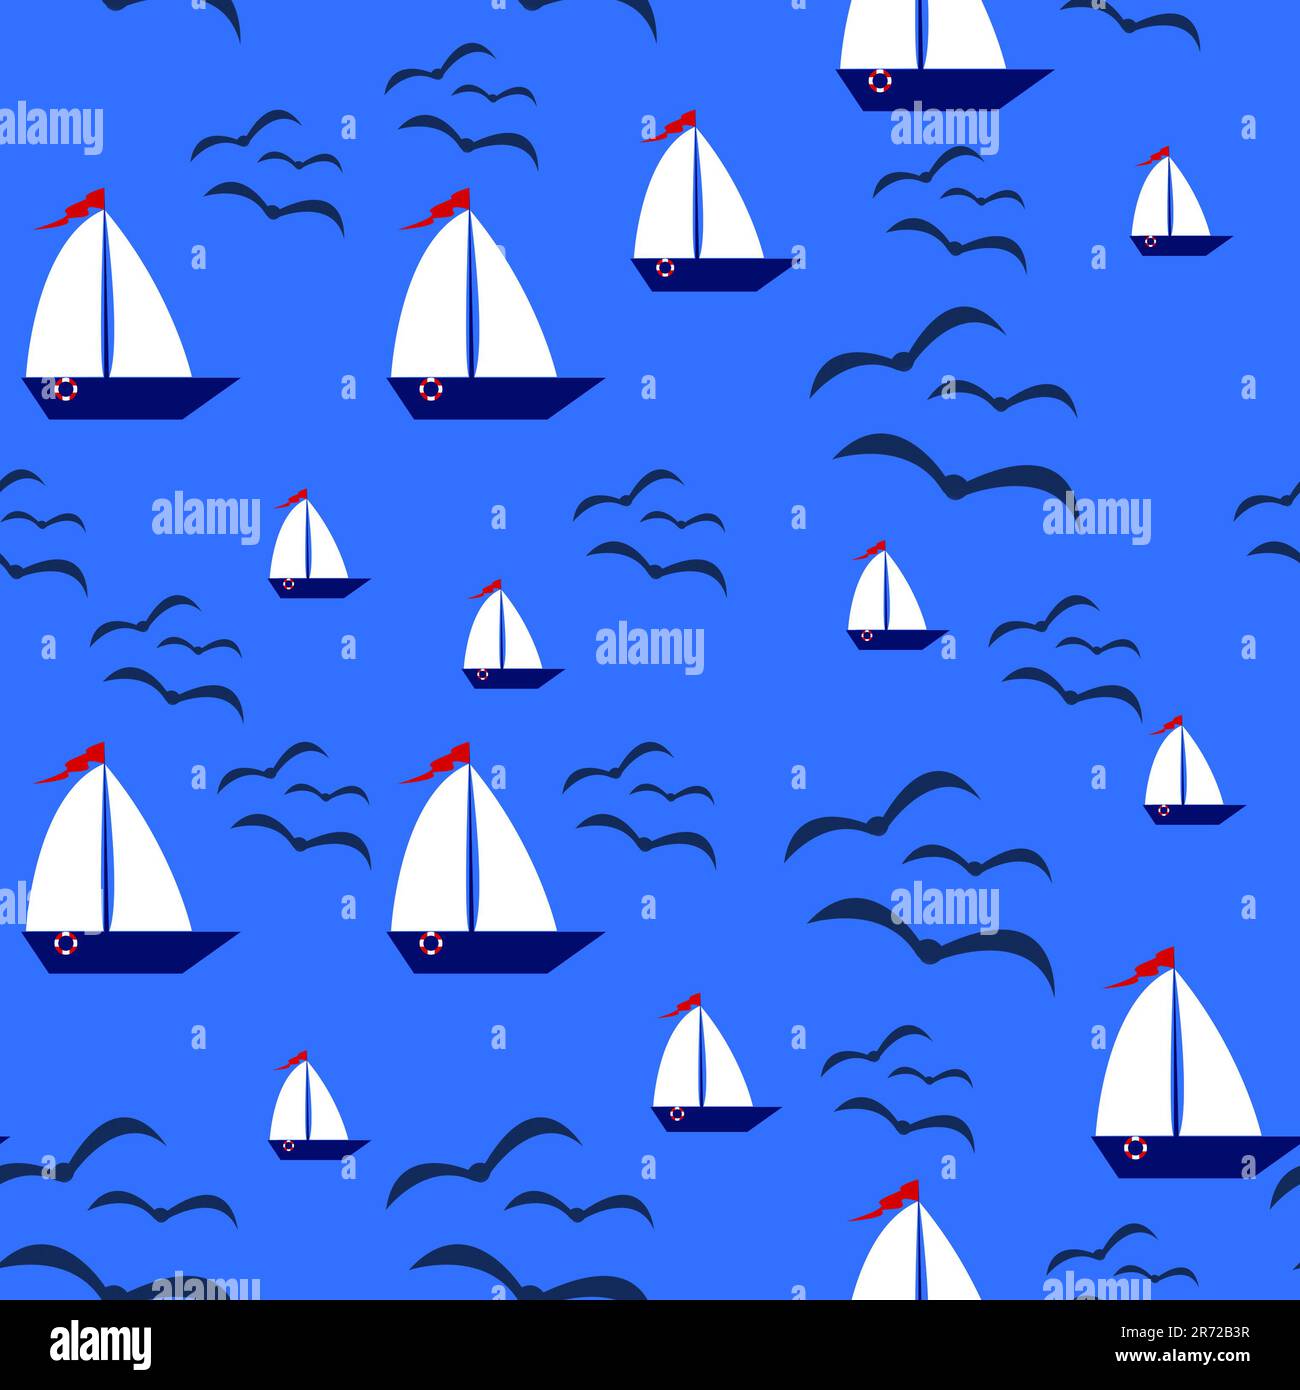 Seamless pattern of summertime. Sailboat and seagulls isolated on blue sea background. Stock Photo